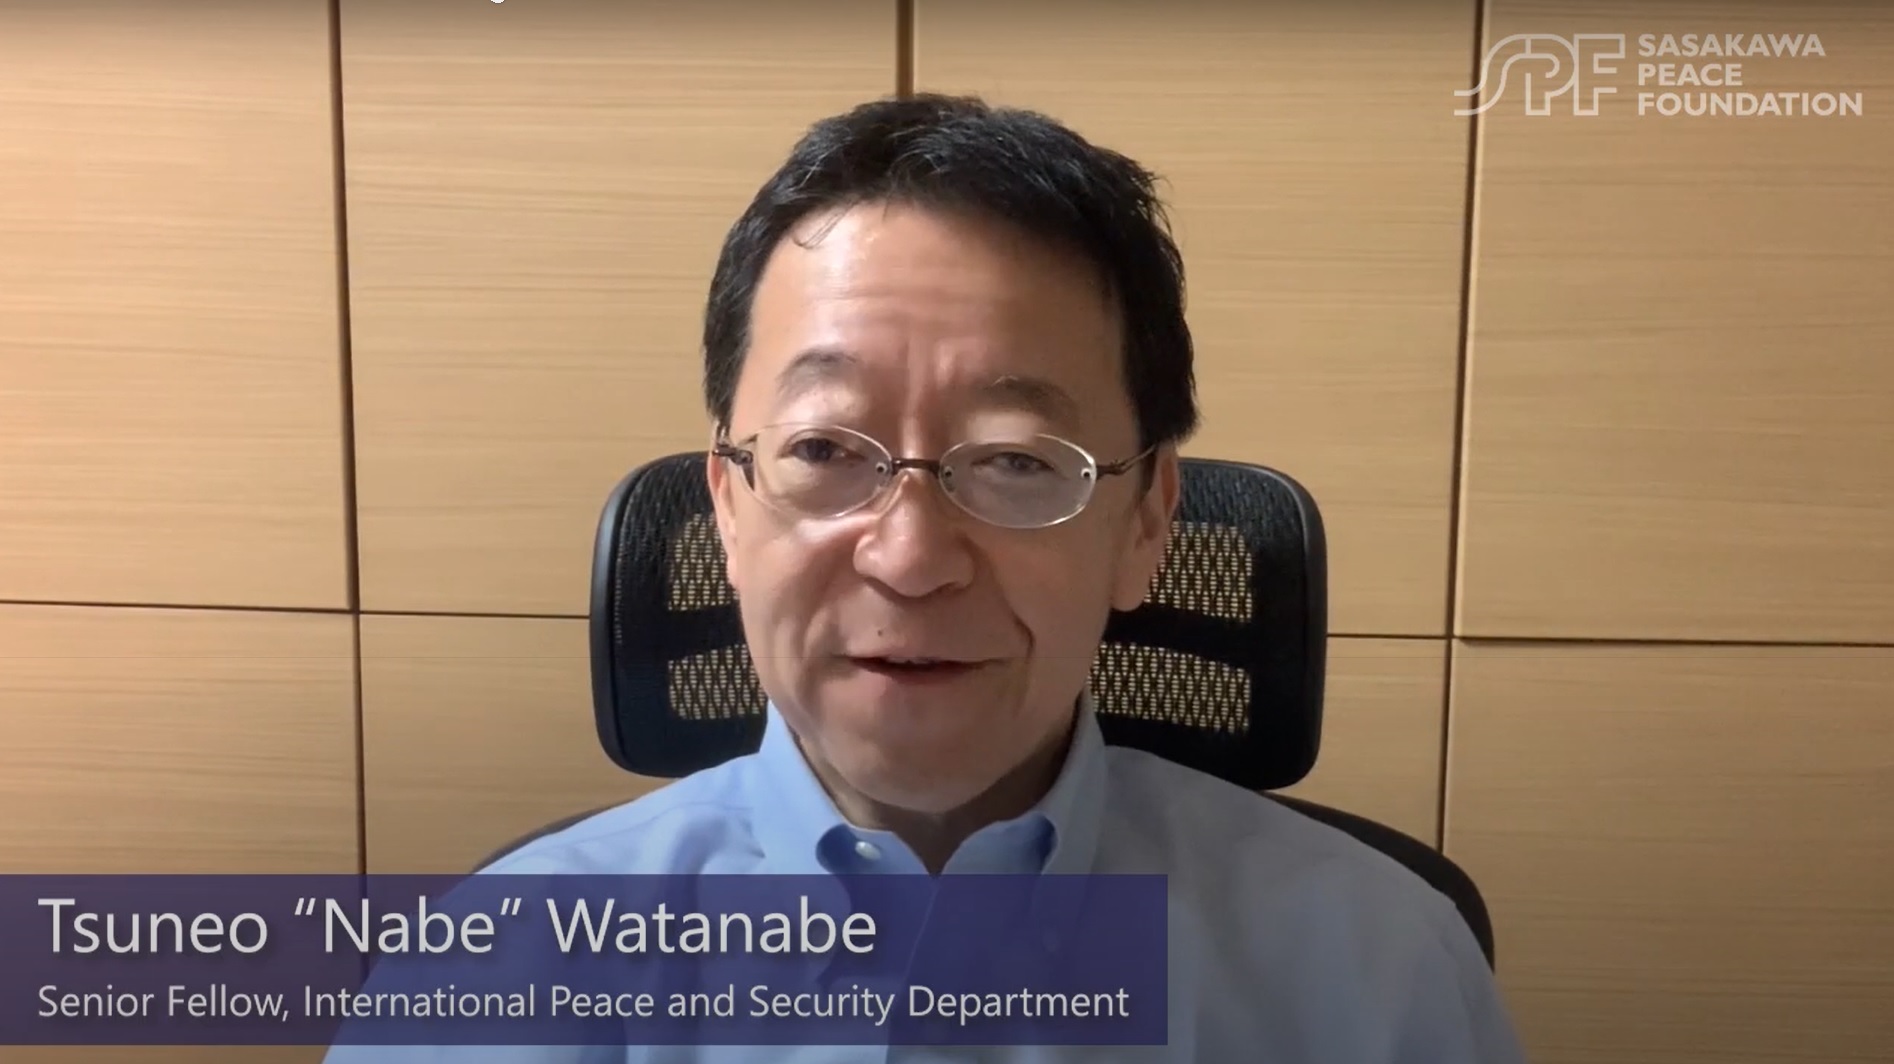 COVID-19 updates from Japan: Interview with SPF Senior Fellow Tsuneo "Nabe" Watanabe